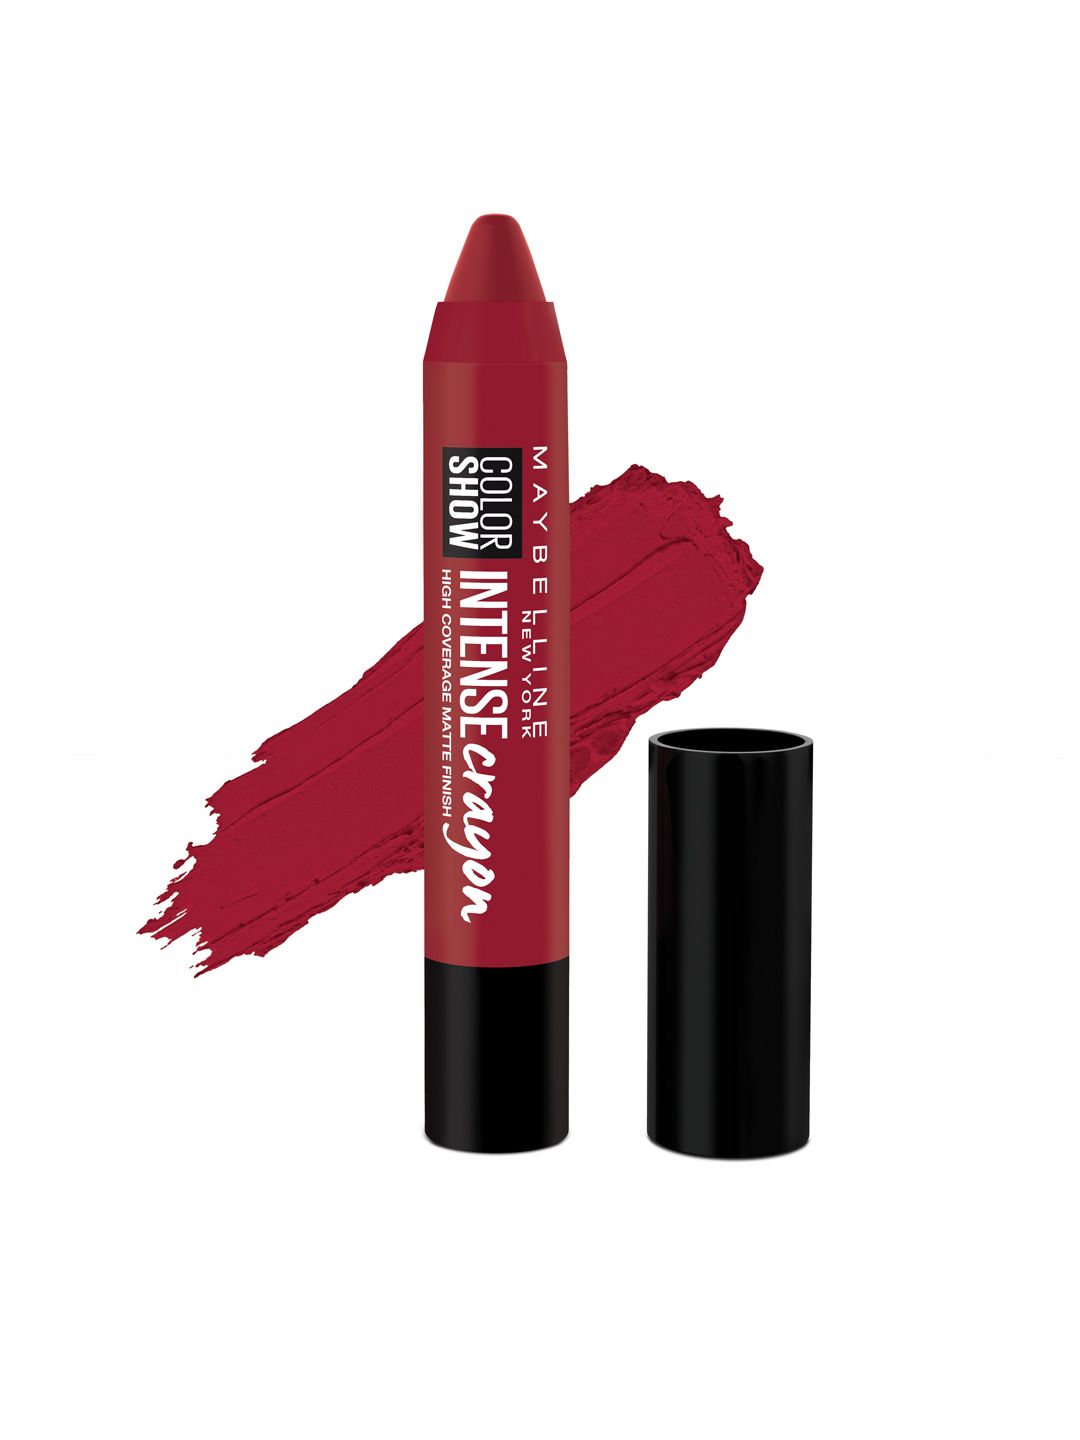 Maybelline Color Show Intense Crayon Lipstick - Intense Red Price in India